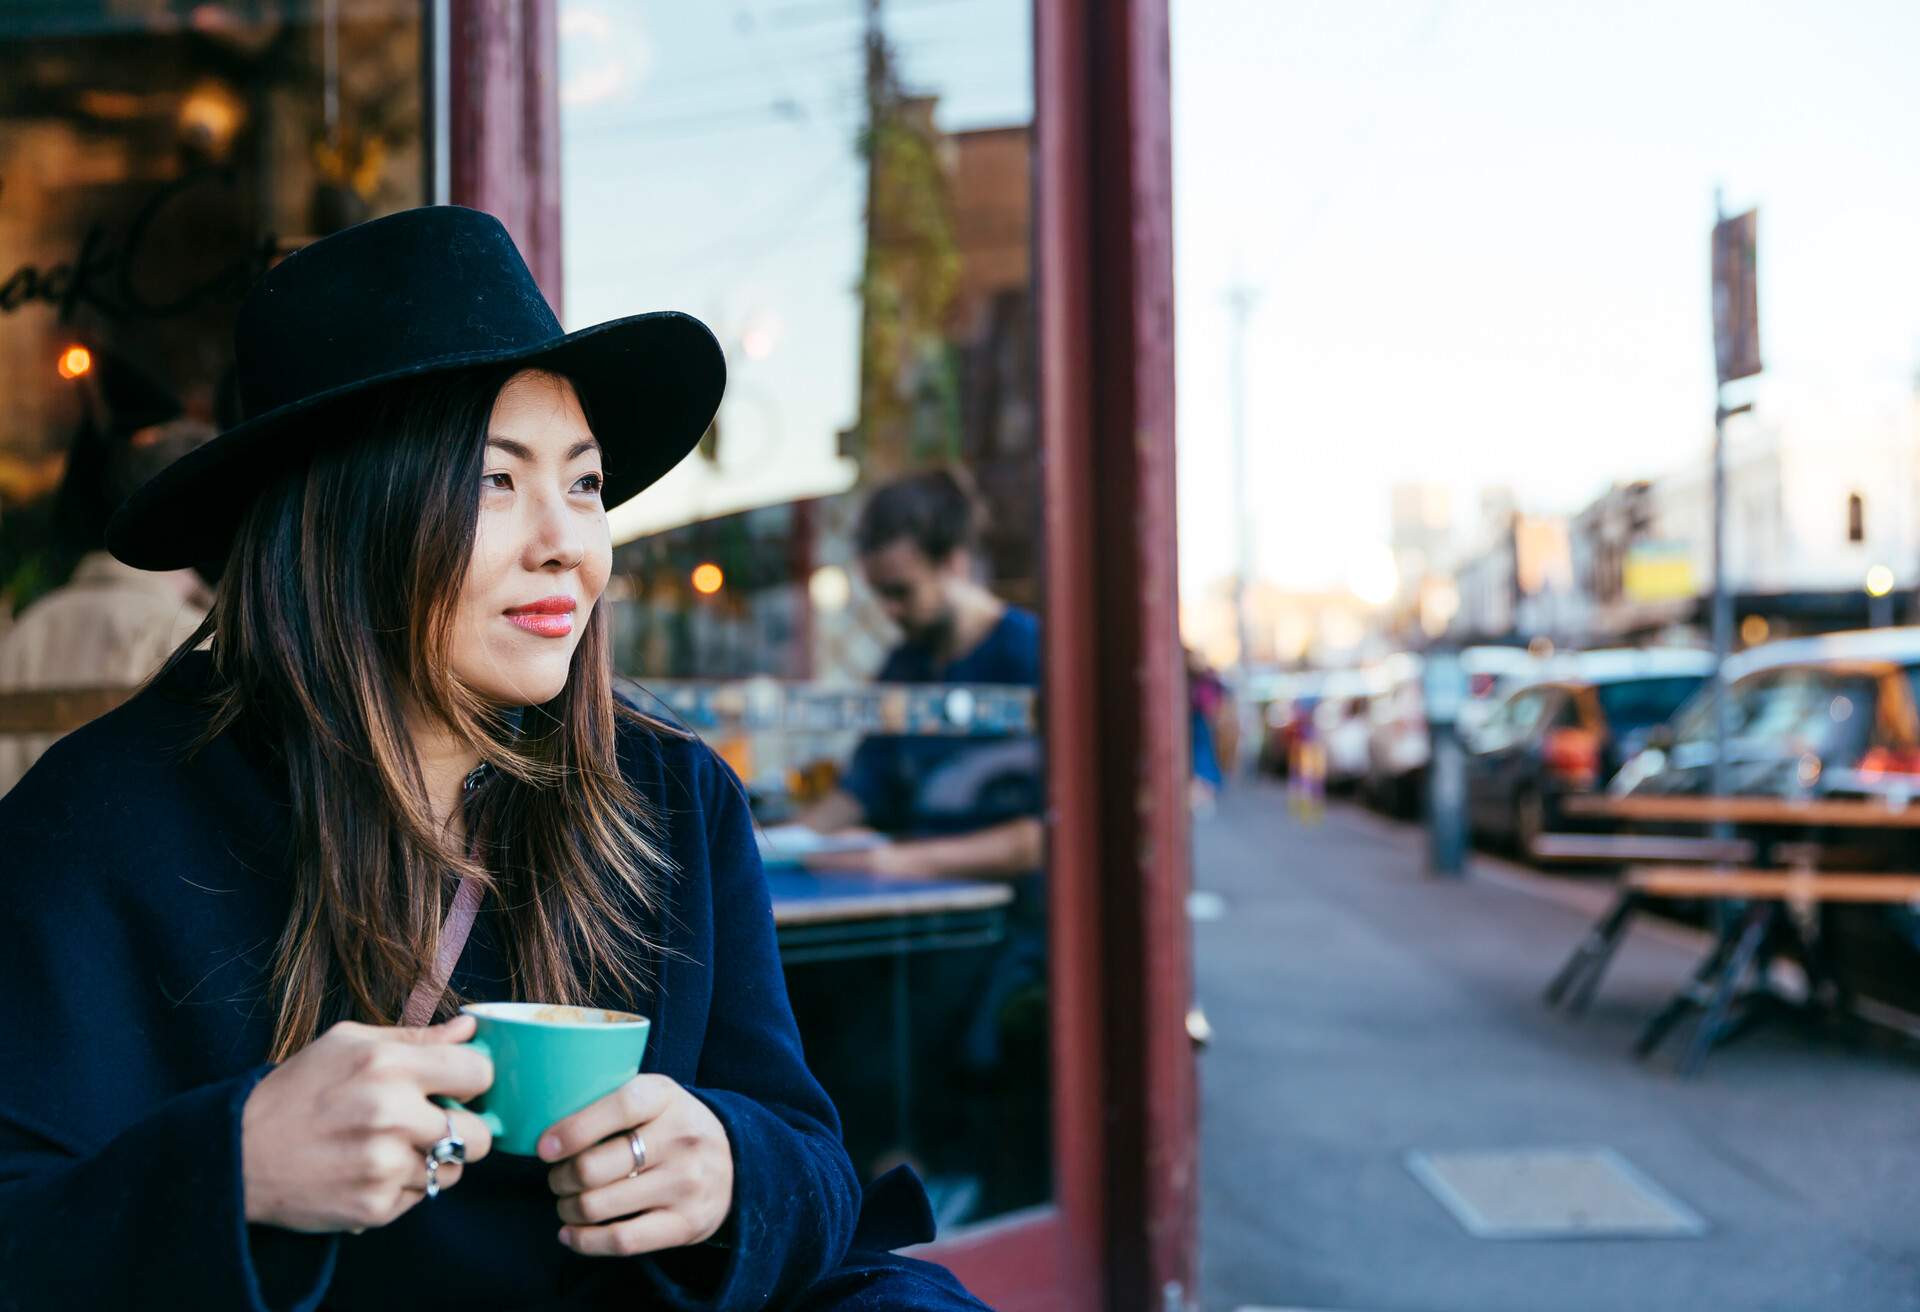 DEST_AUSTRALIA_MELBOURNE_FITZROY_THEME_PEOPLE_WOMAN-TAKING-COFFEE_GettyImages-809632106